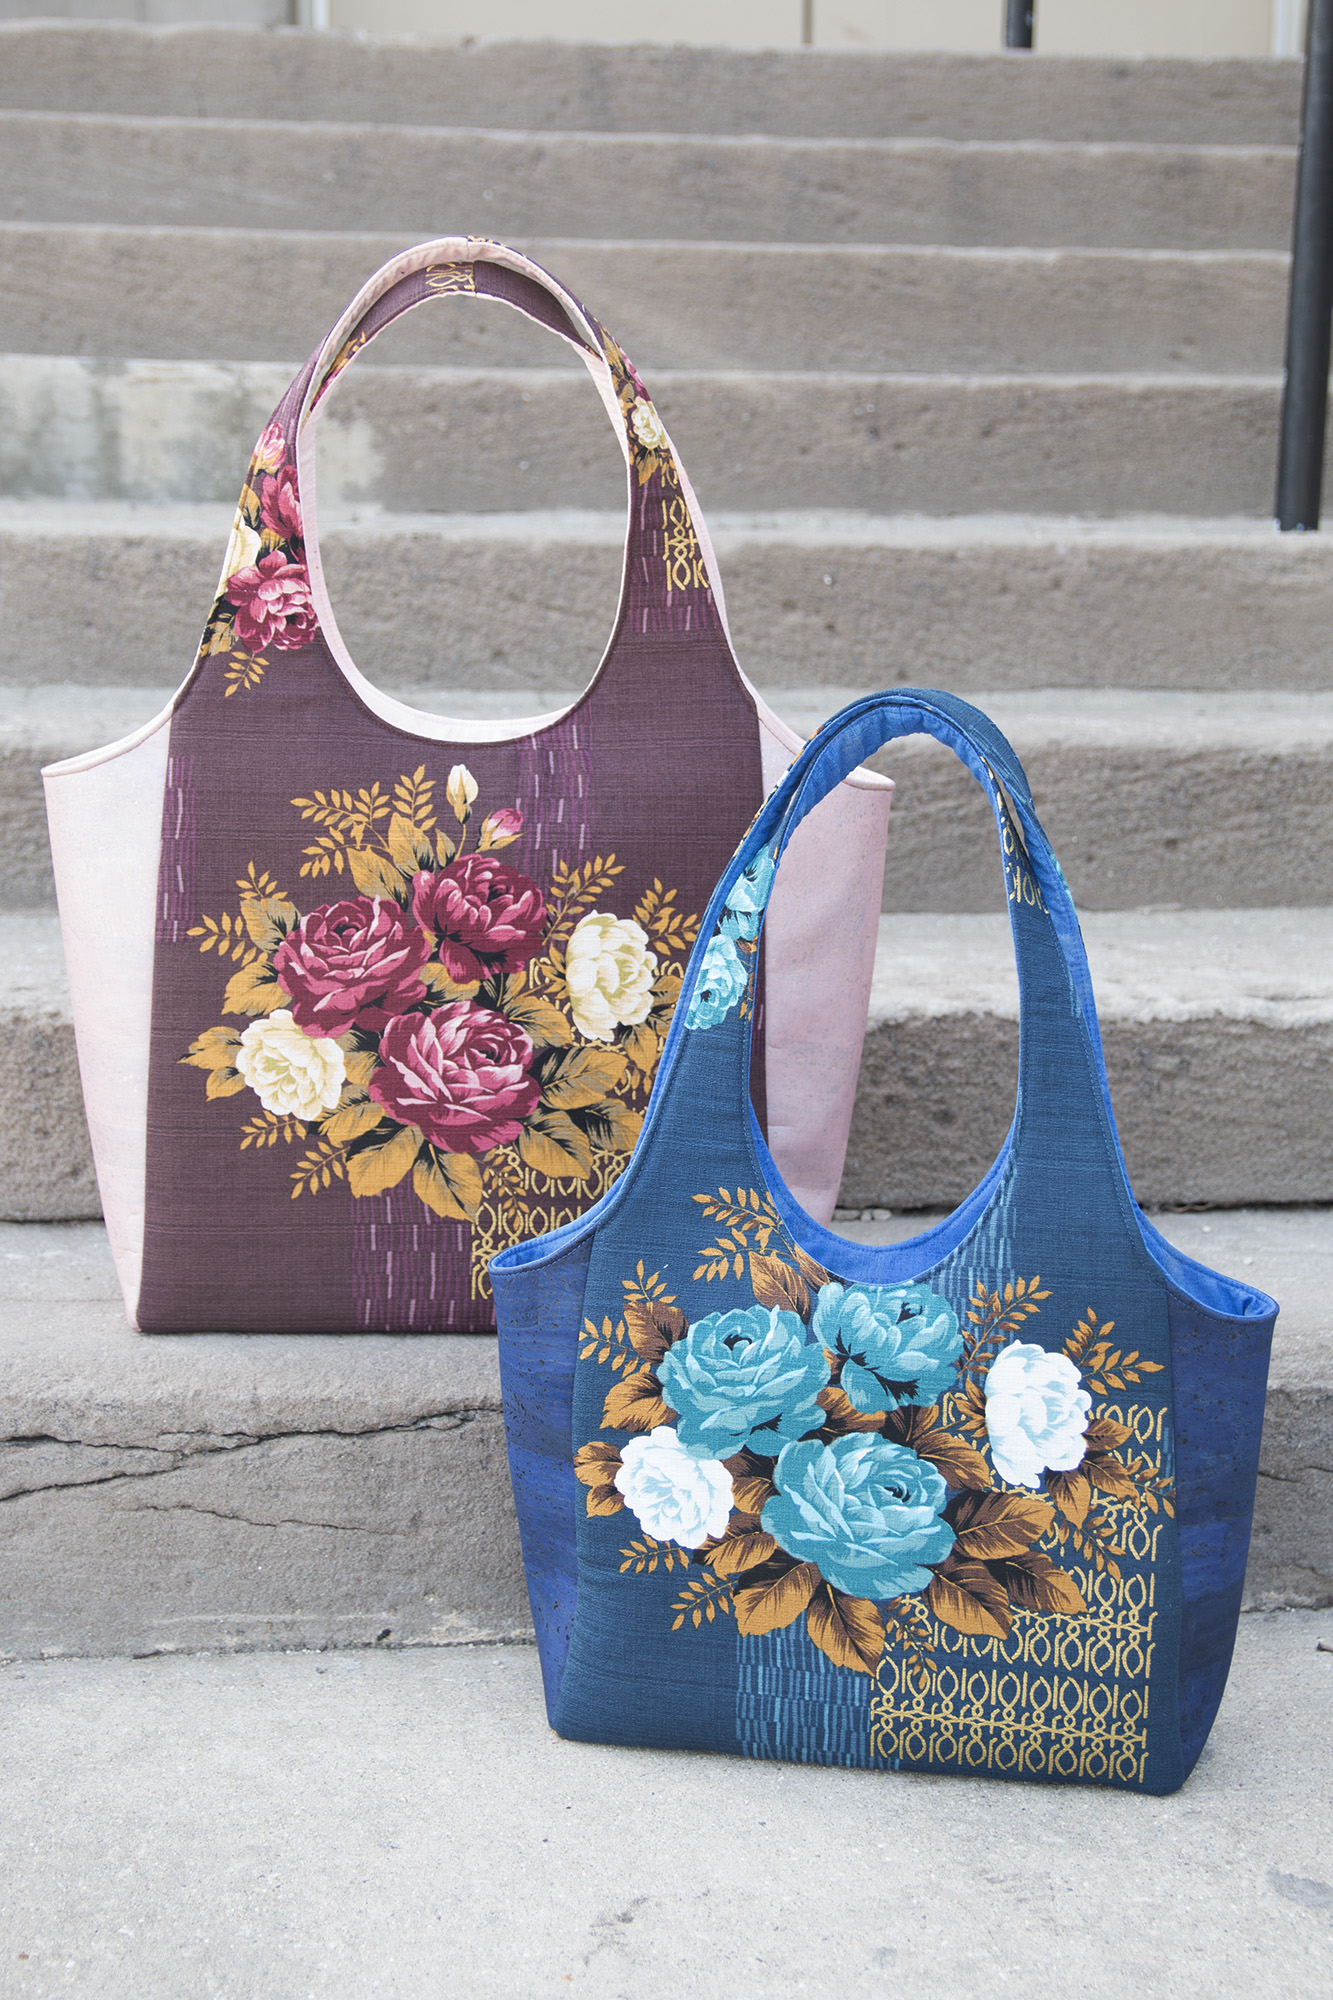 DIY Tote Bag: Add a Pop of Color with Two-Sided Fabric Handles